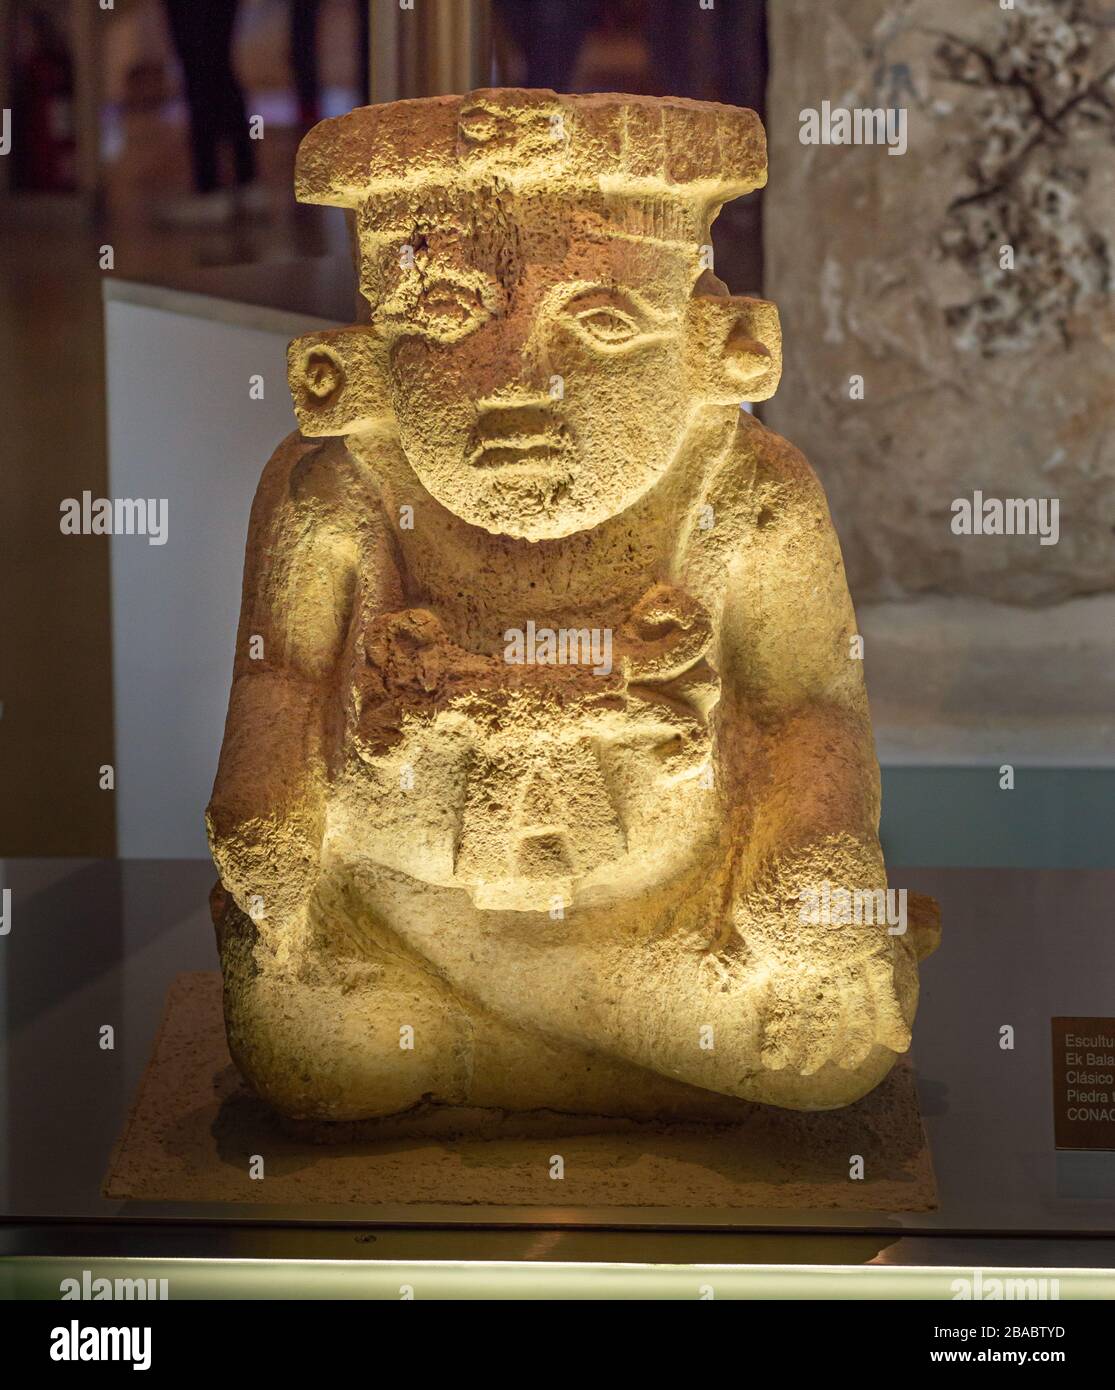 Maya stone sculpture of a seated figure, found at Ek Balam, from the late classic period. Museo Maya, Merida, Yucatan, Mexico. Stock Photo